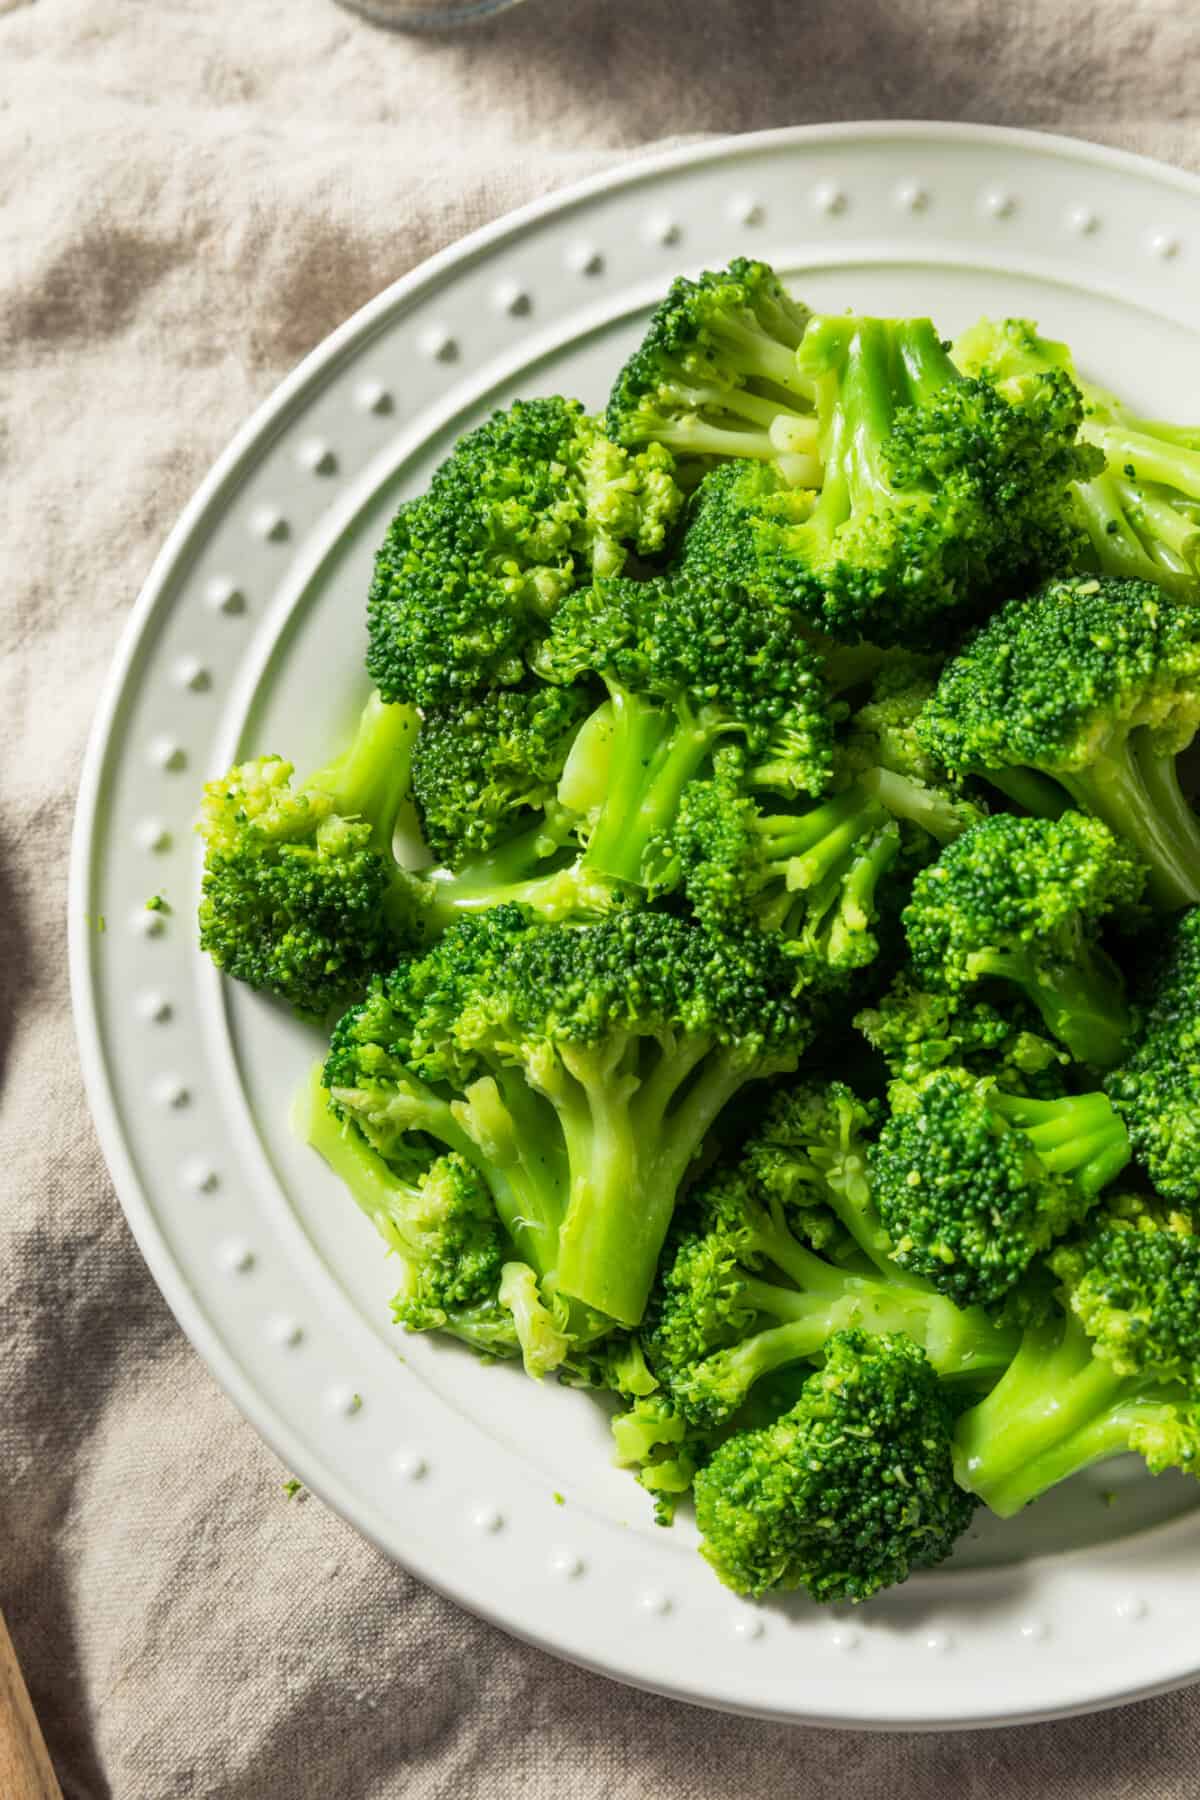 A plate of blanched broccoli.